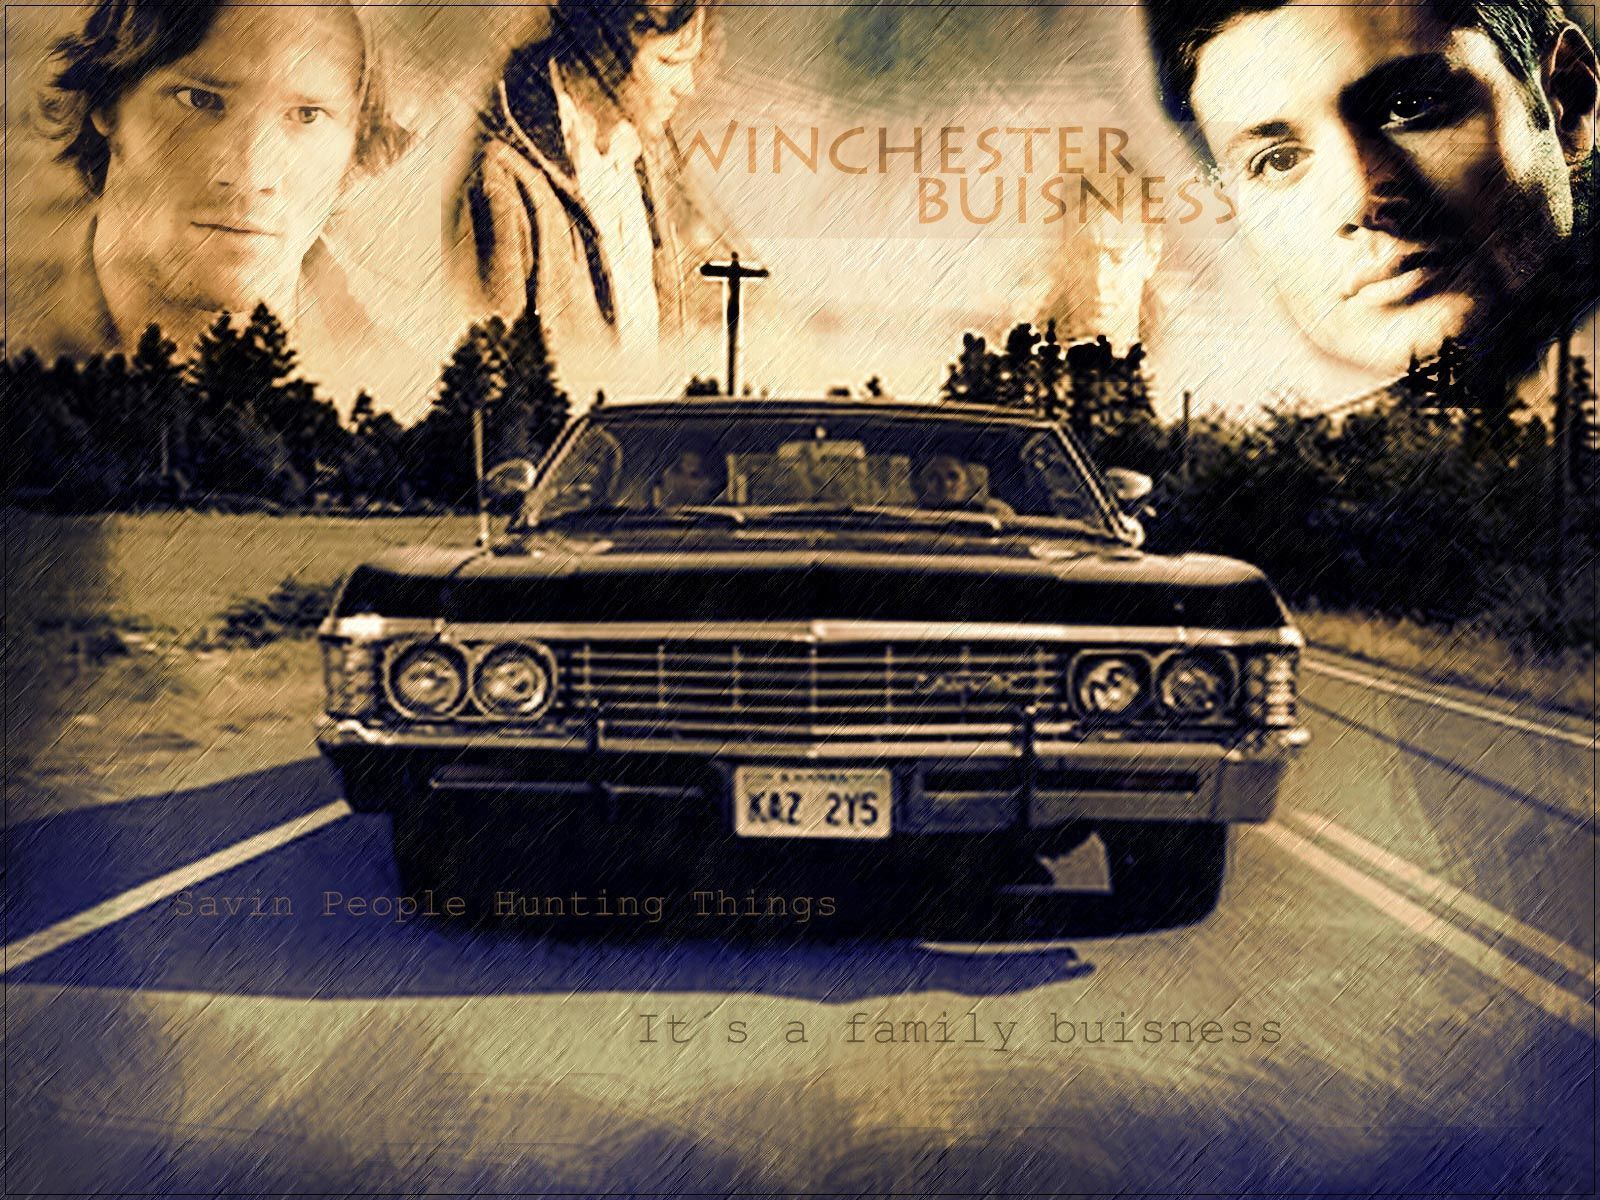 Supernatural Wallpapers HD Archives - Page 3 of 4 - Wallpaper